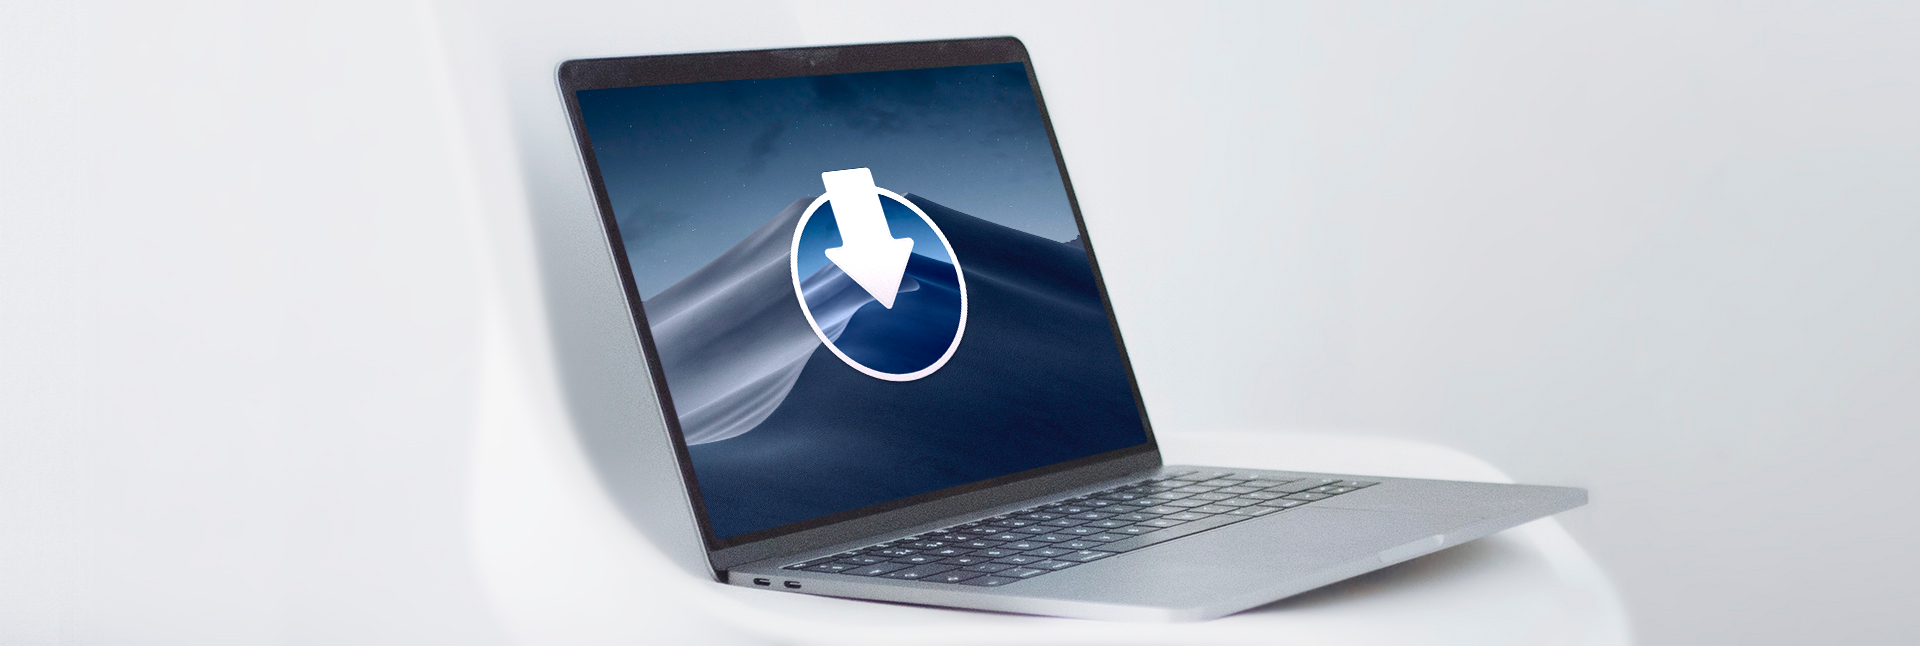 How to download macos mojave on my laptop computer